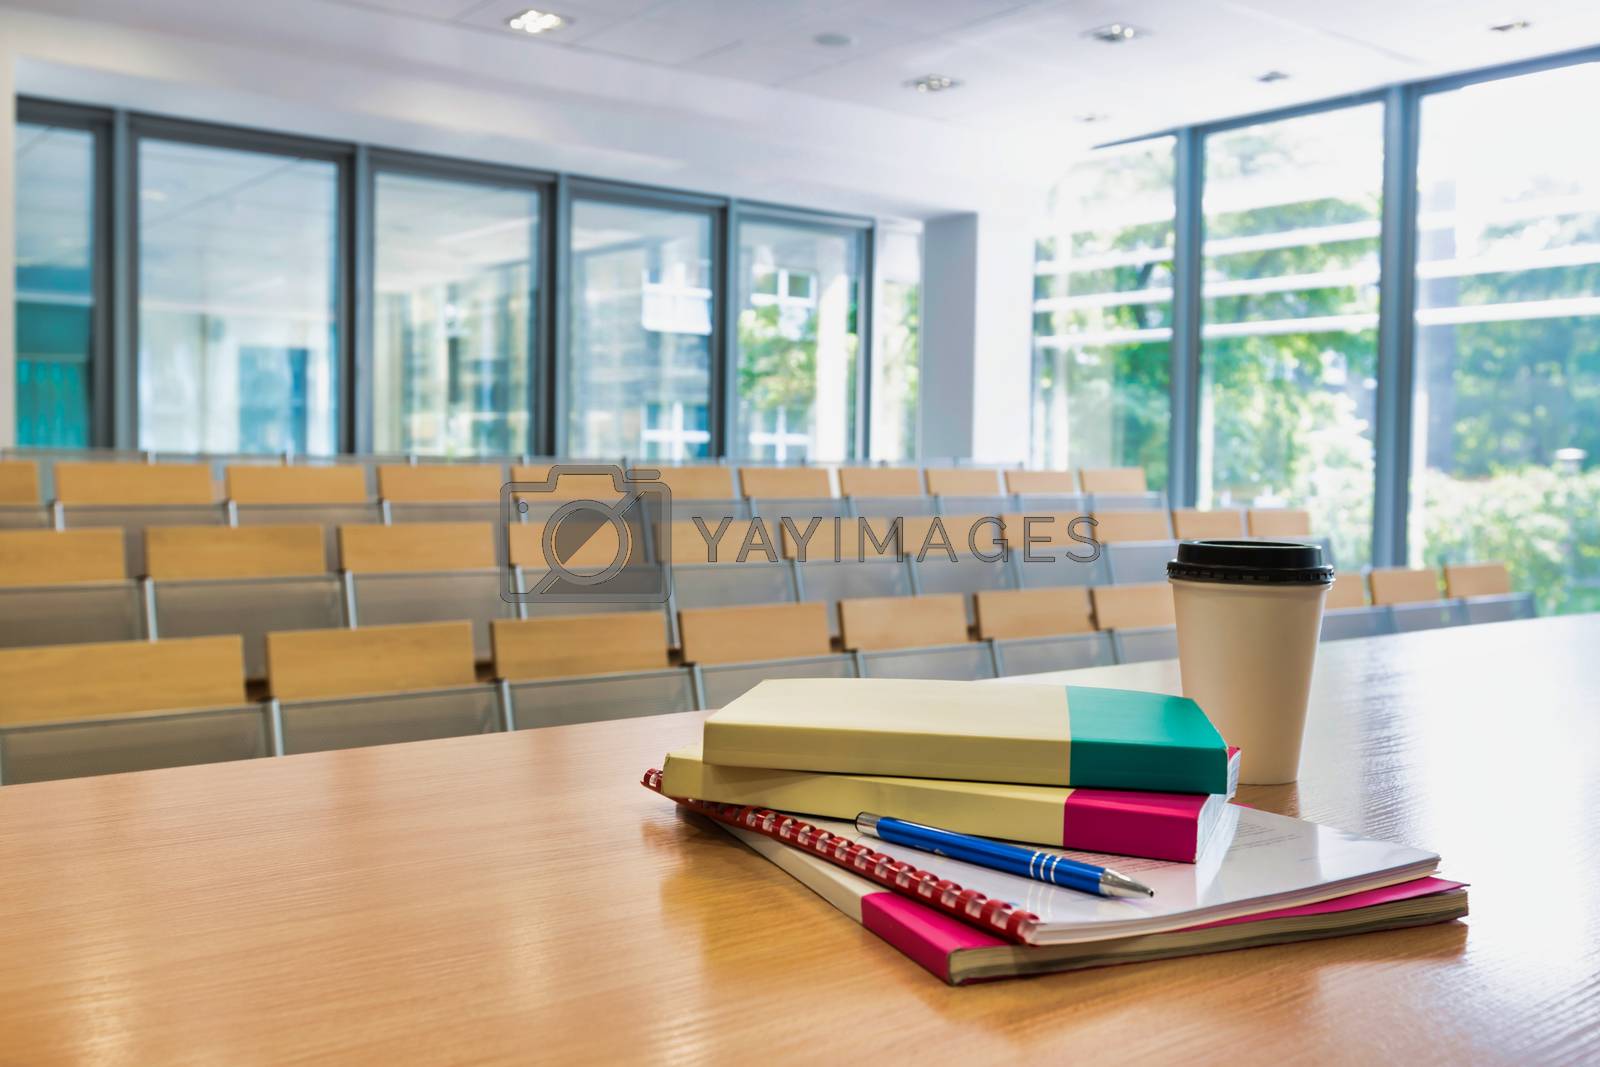 Royalty free image of Photo of empty classroom in school by moodboard